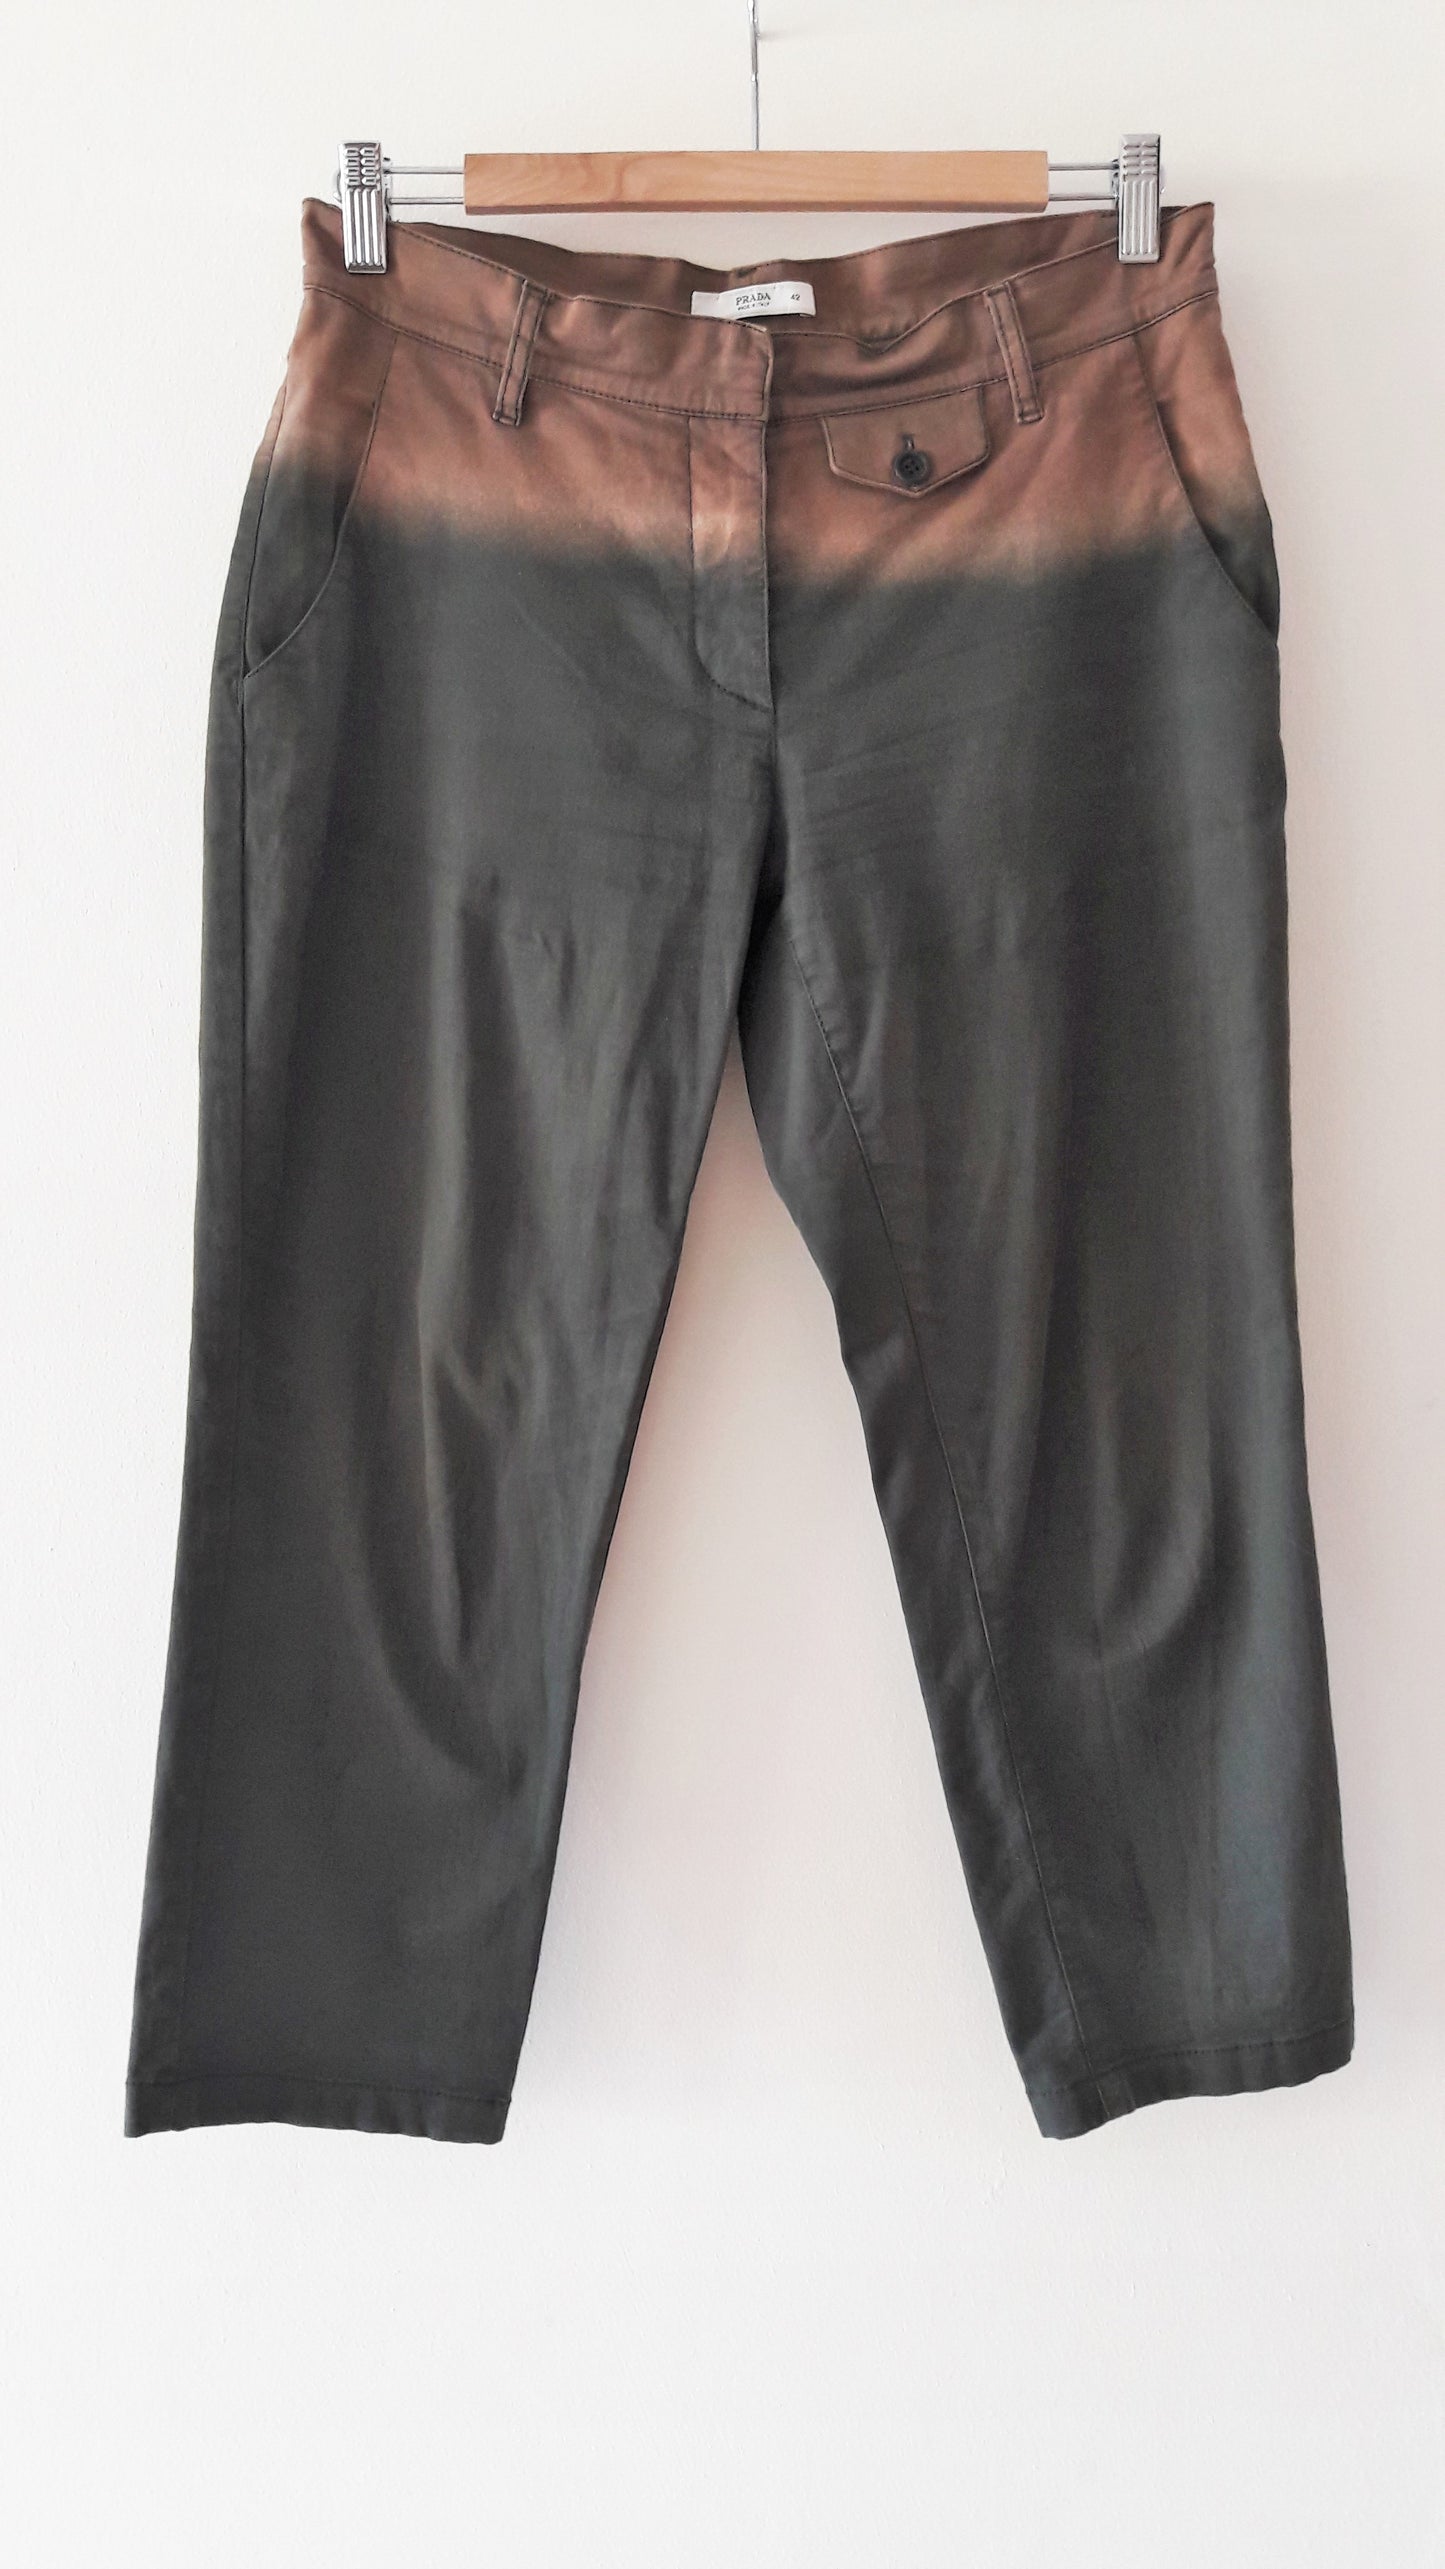 Ombré Prada Cropped Chino Trousers